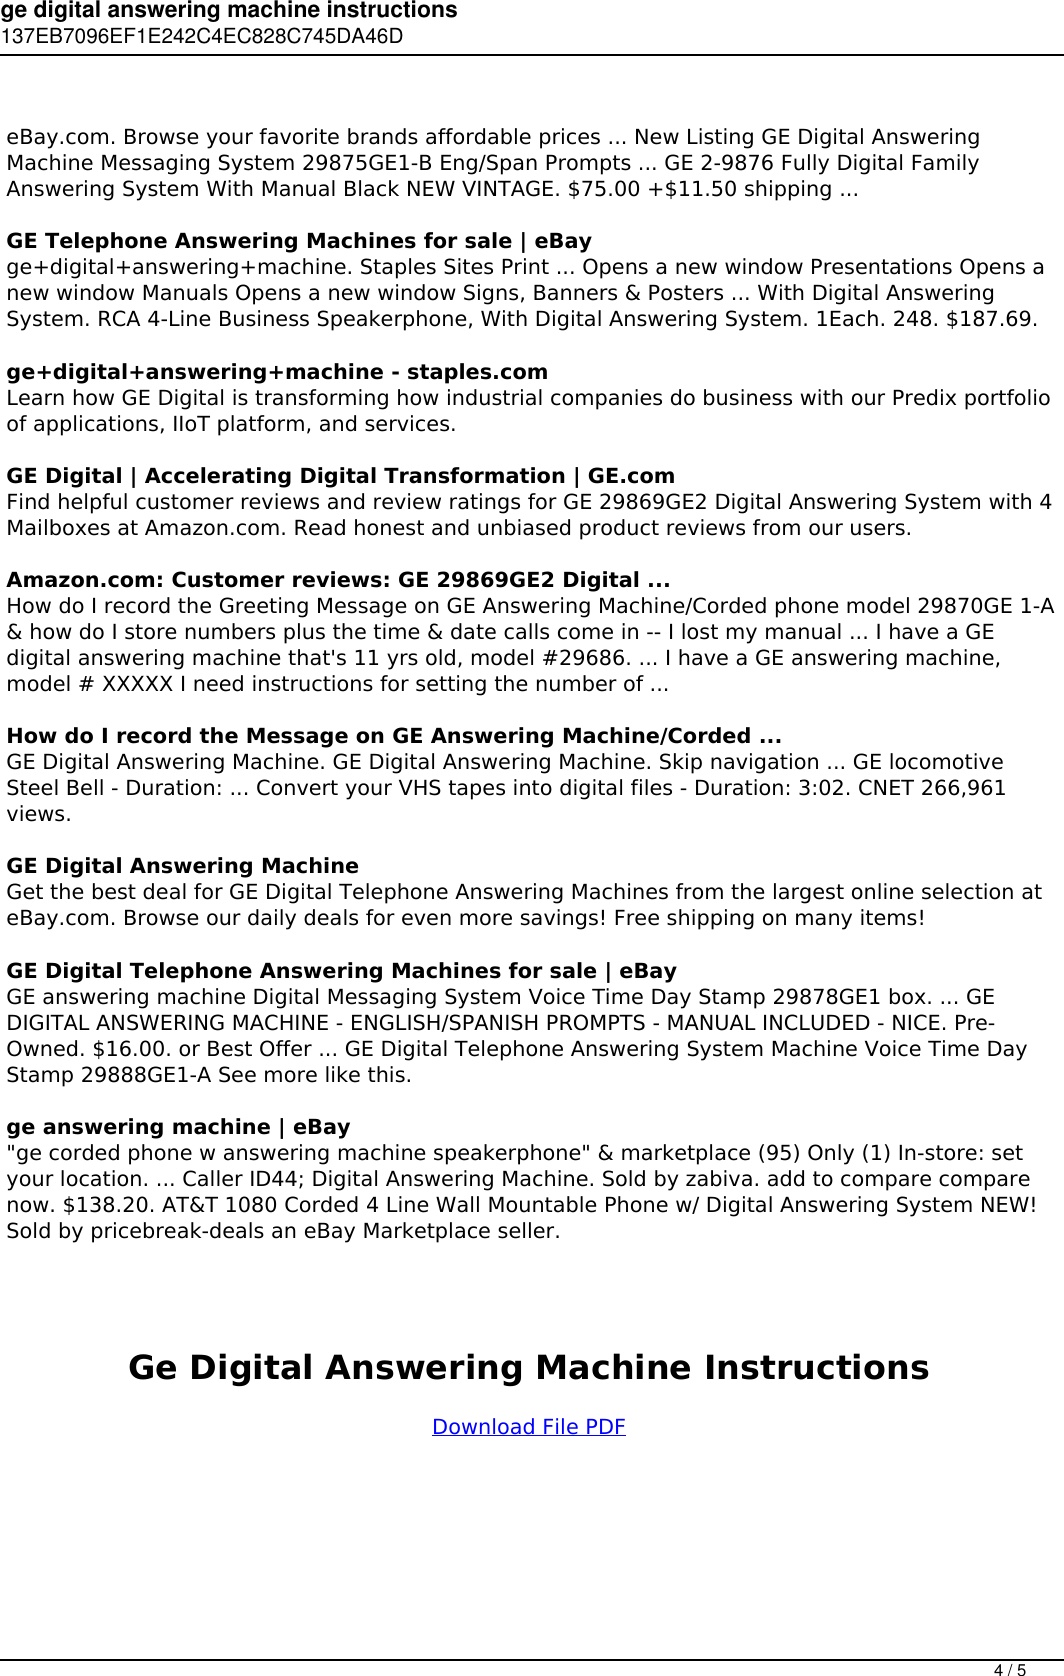 Page 4 of 5 - Ge Digital Answering Machine Instructions